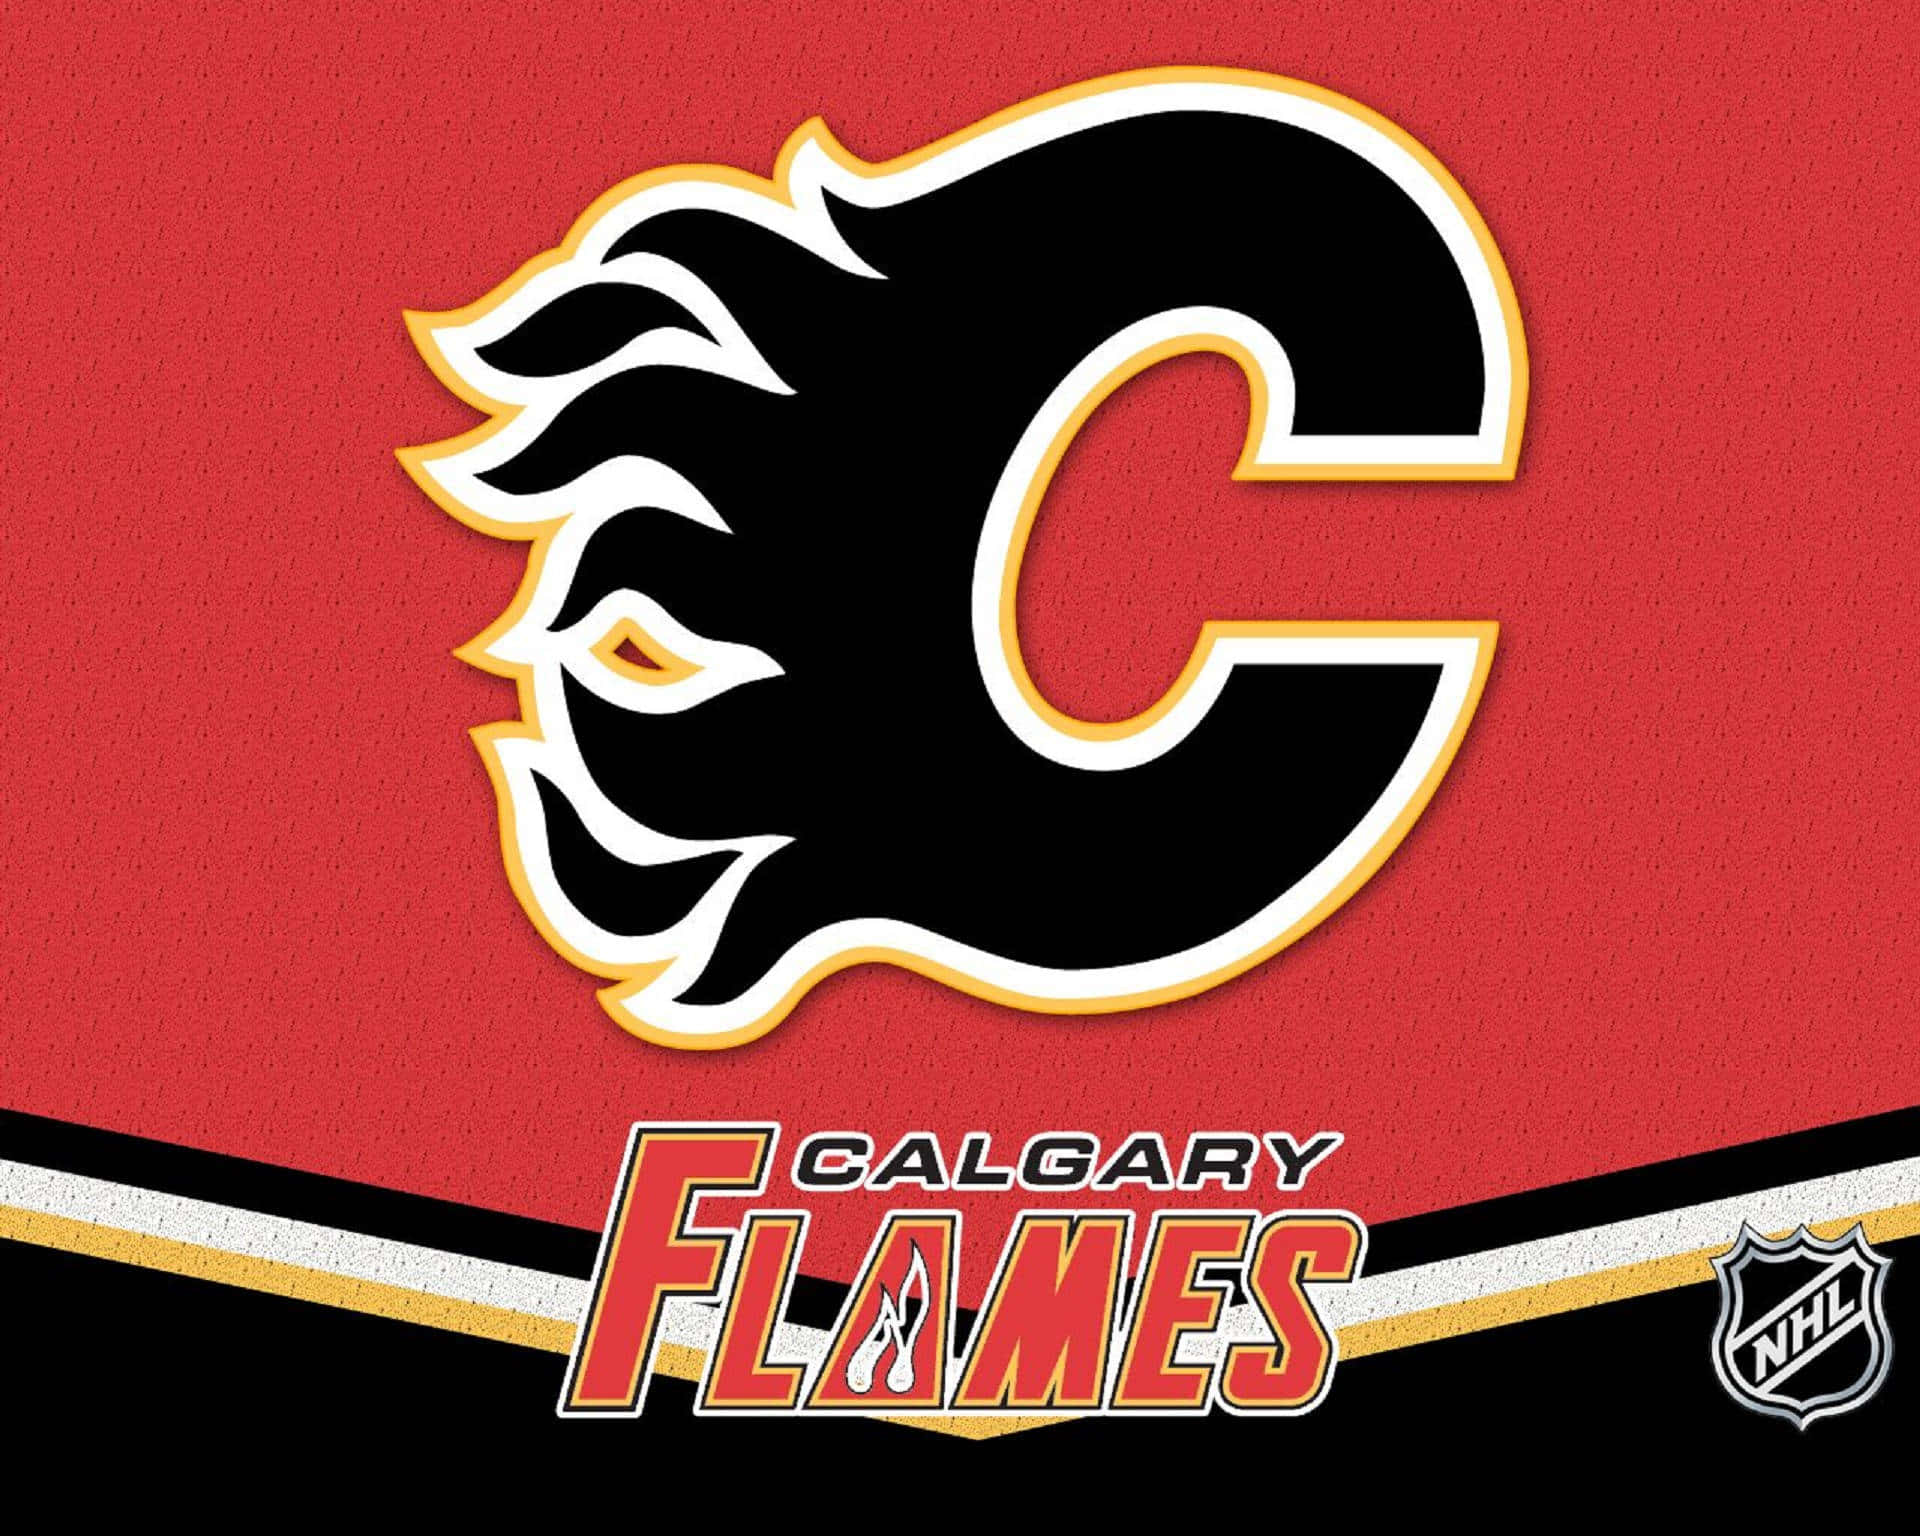 A spectacular night of hockey at the Calgary Flames arena!